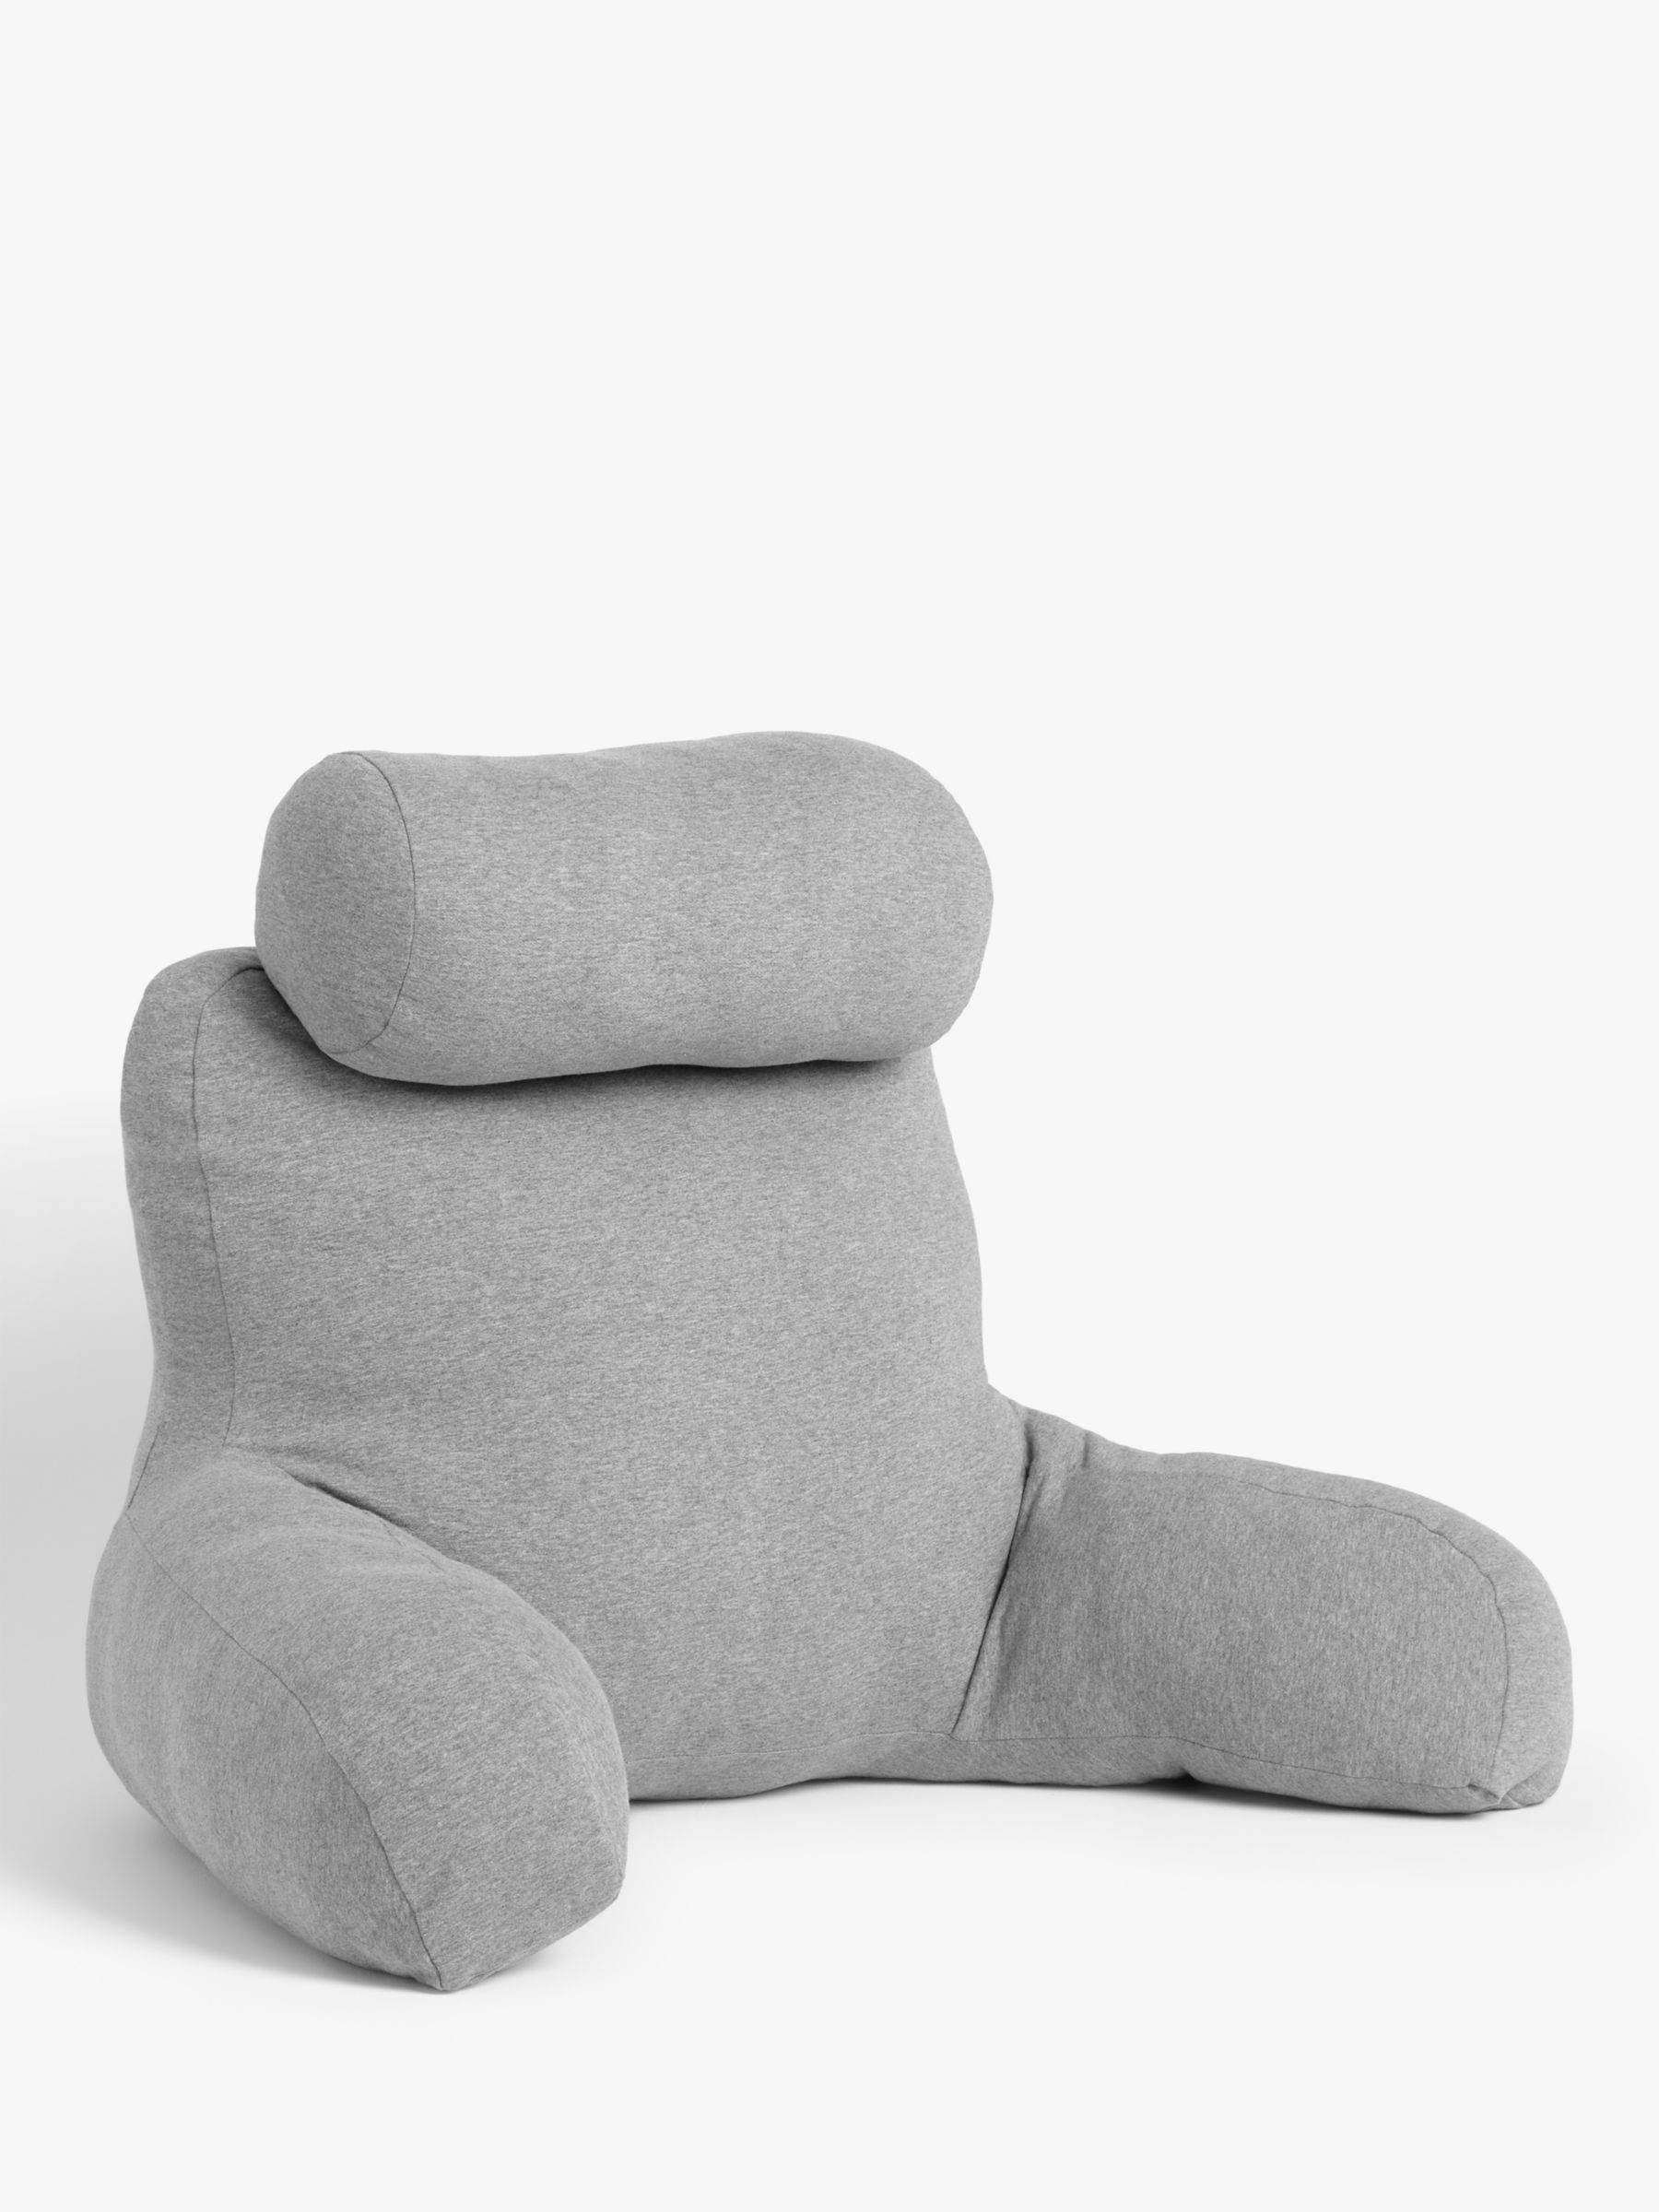 the support pillow